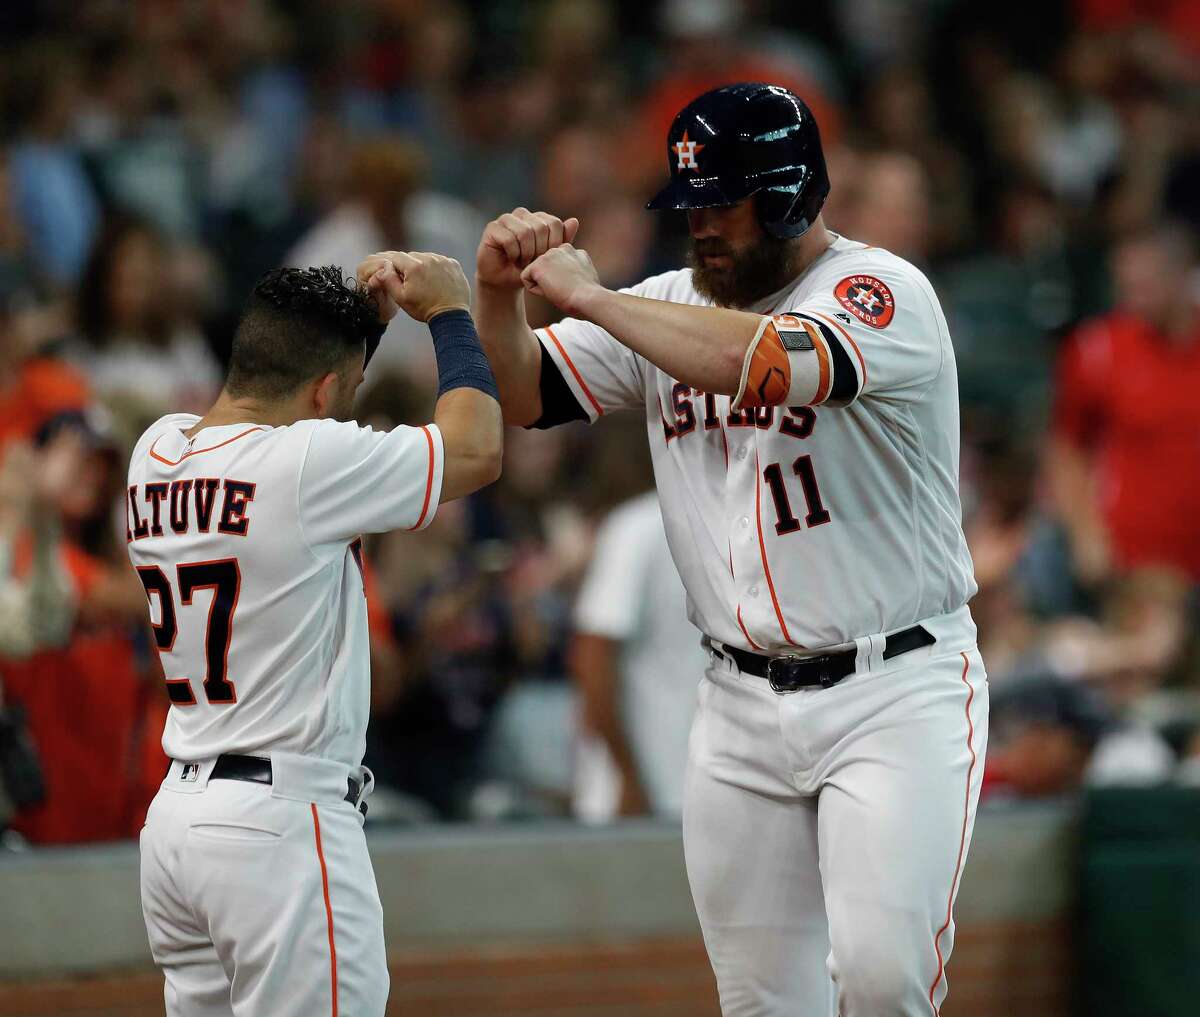 The long and short of it for the Astros' offense Tuesday night were Jose Altuve, left, who had three singles, and Evan Gattis, here receiving congratulations from his diminutive teammate after hitting the first of two homers in the second.